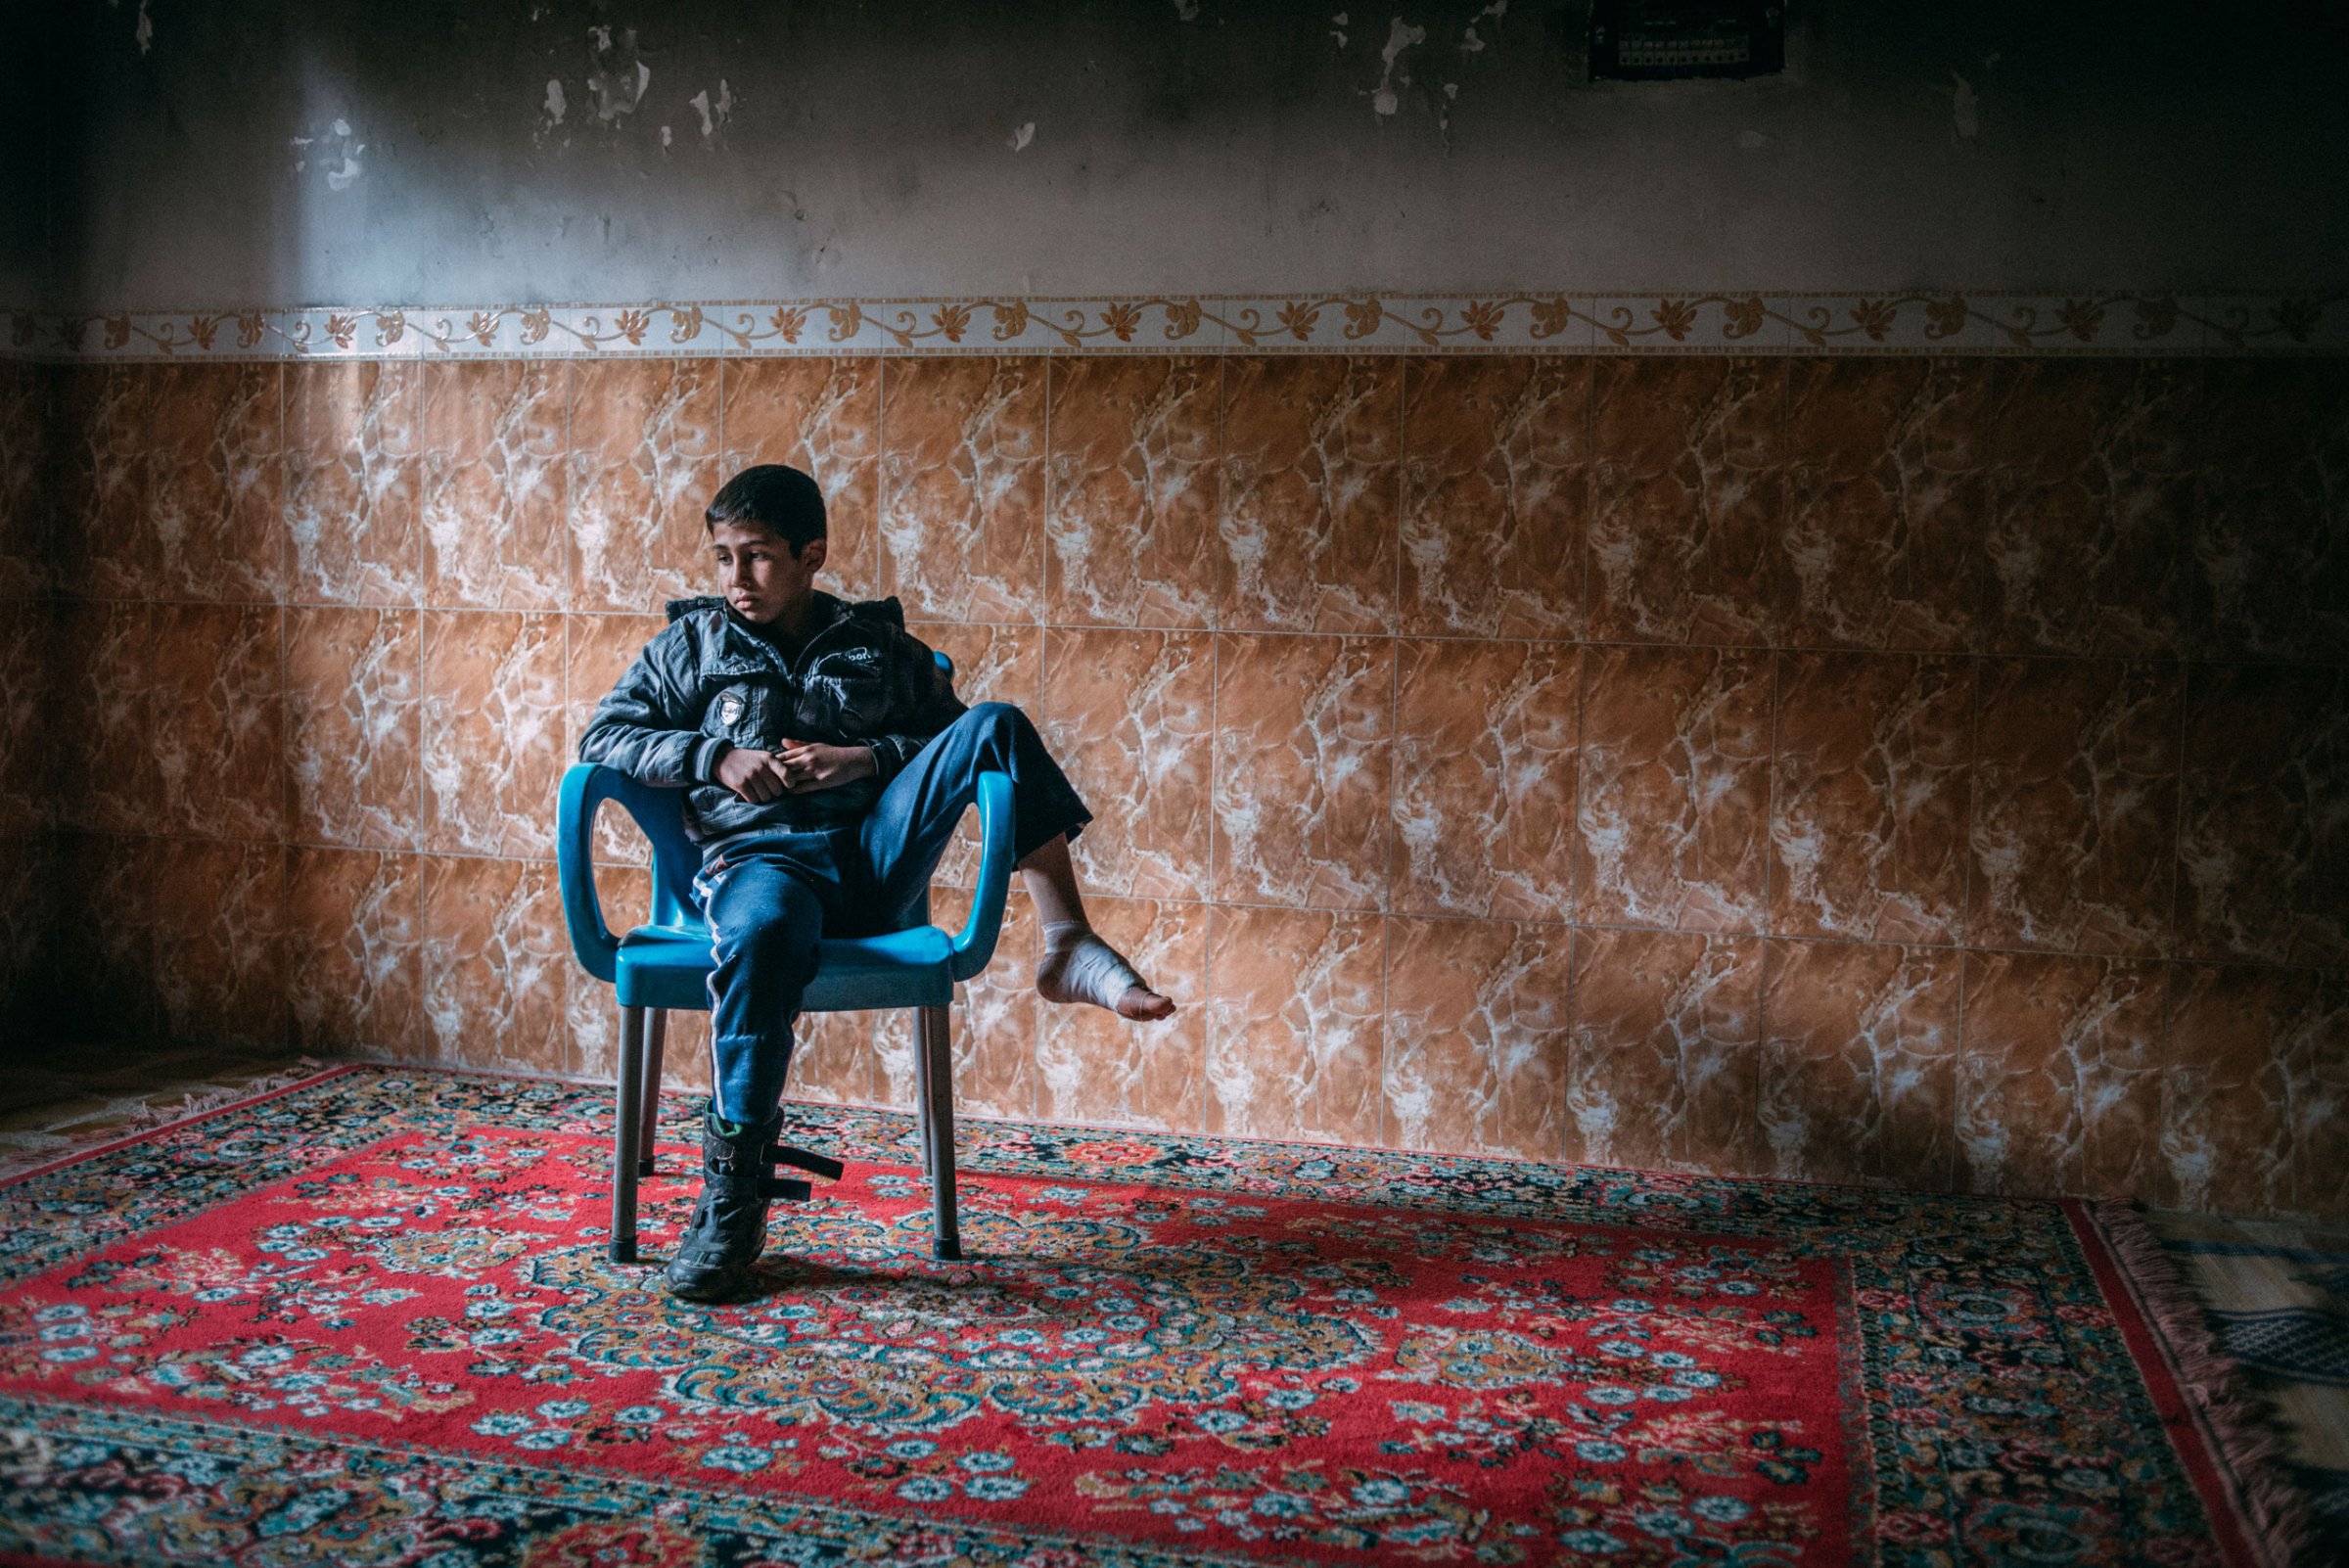 Ali Bashar Ali, 8, lives with his family in his grandfather’s house in the Mosul al-Jadida neighborhood of western Mosul, where Iraqi forces are battling Islamic State militants for control of the city. While fleeing their home, Ali was hit in the foot by a stray bullet. On April 1, 2017, he answered a few questions about his recent days in this war zone. His most recent meal? “Tomato soup and rice. During the battle [the liberation of his neighborhood] we only ate a few meals in three days.” How does he fall asleep at night? “We don’t sleep well. I sleep a little and then wake up, until morning.” His favorite toy? “A boat.” What does he want to be when he grows up? “A doctor.”